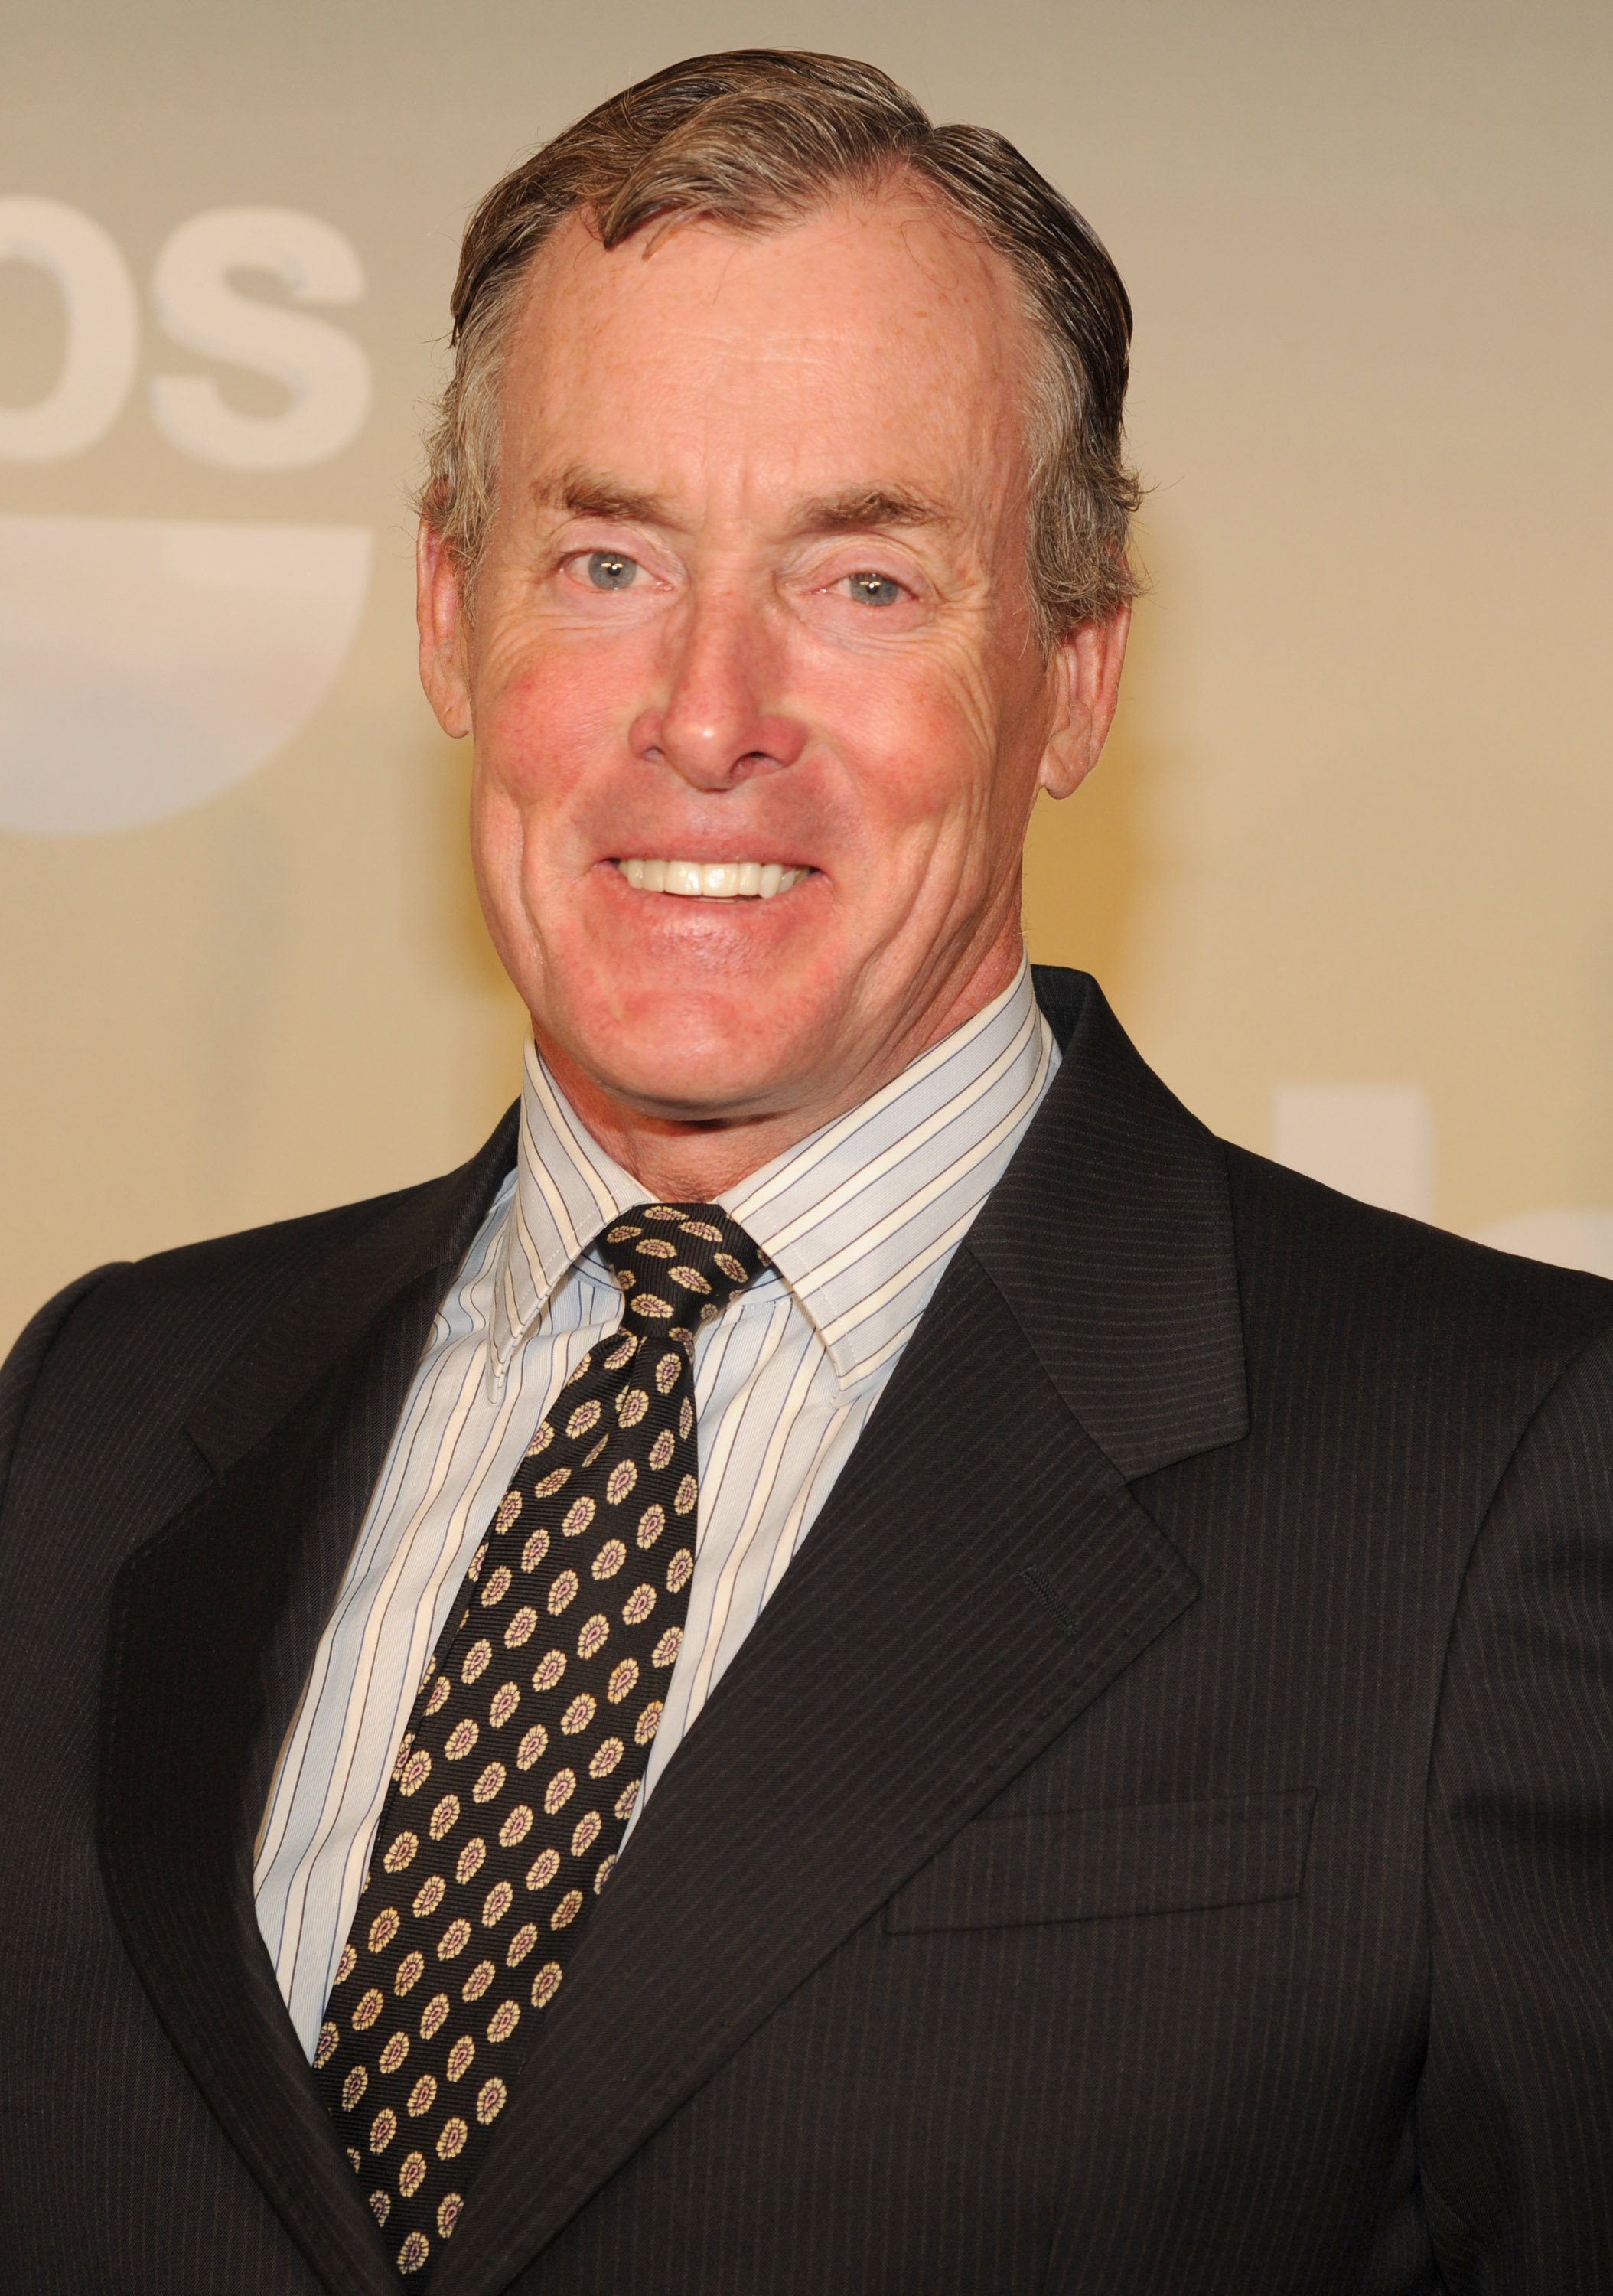 John C. McGinley at The Theater at Madison Square Garden on May 14, 2014, in New York City. I Source: Getty Images